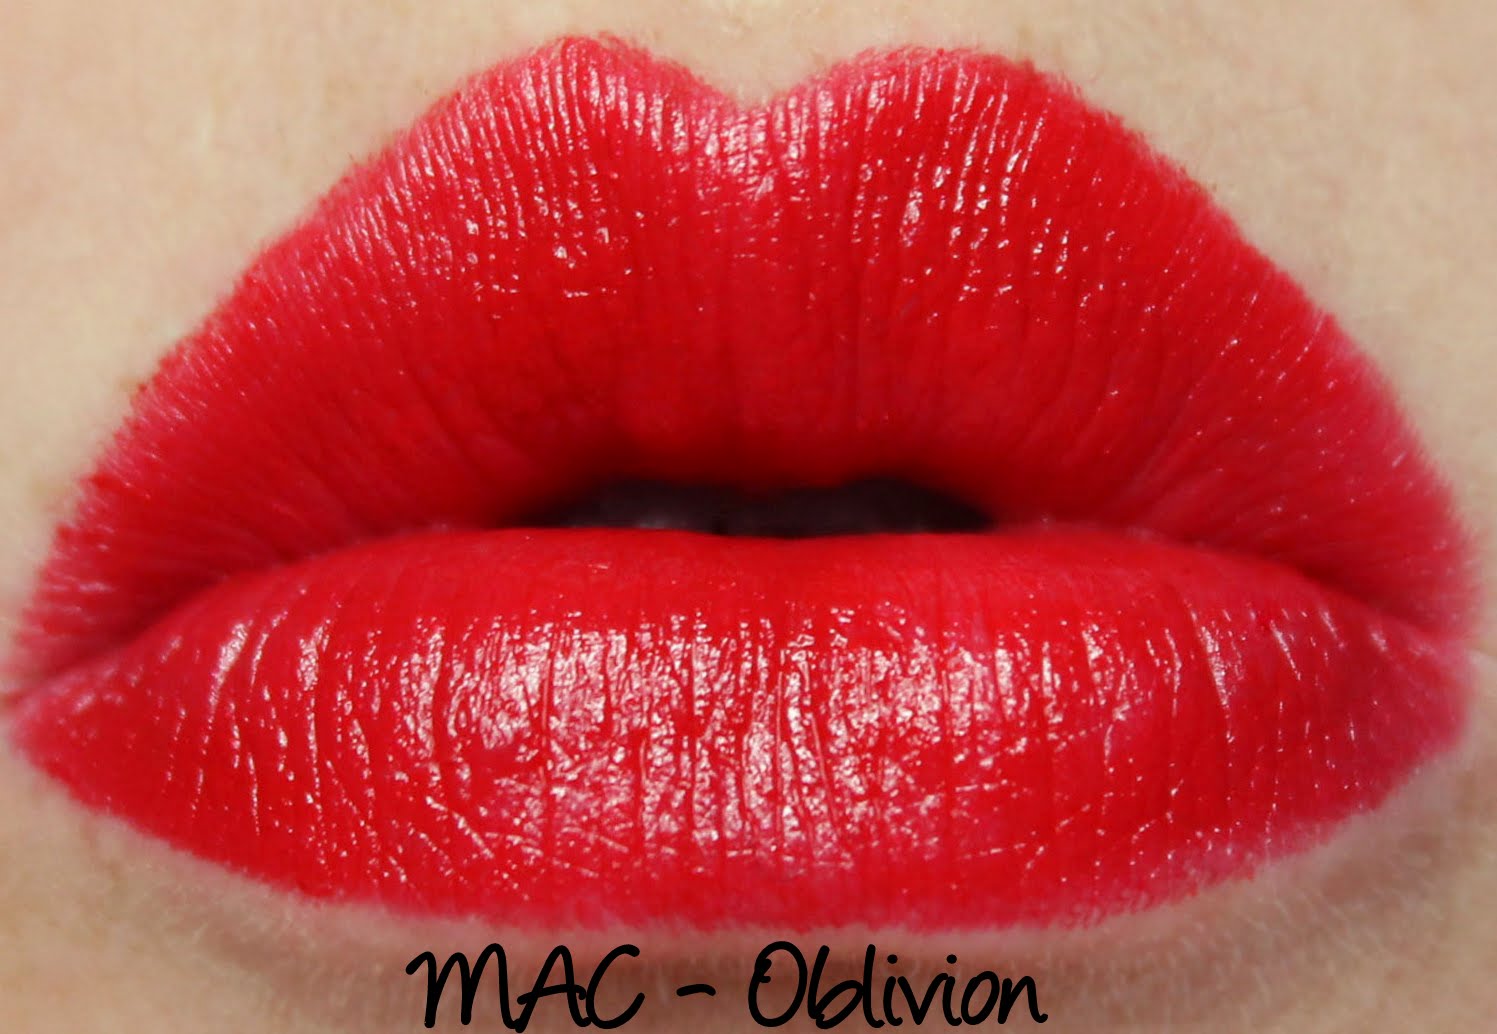 MAC X Rocky Horror Picture Show Lipsticks: Oblivion Swatches & Review